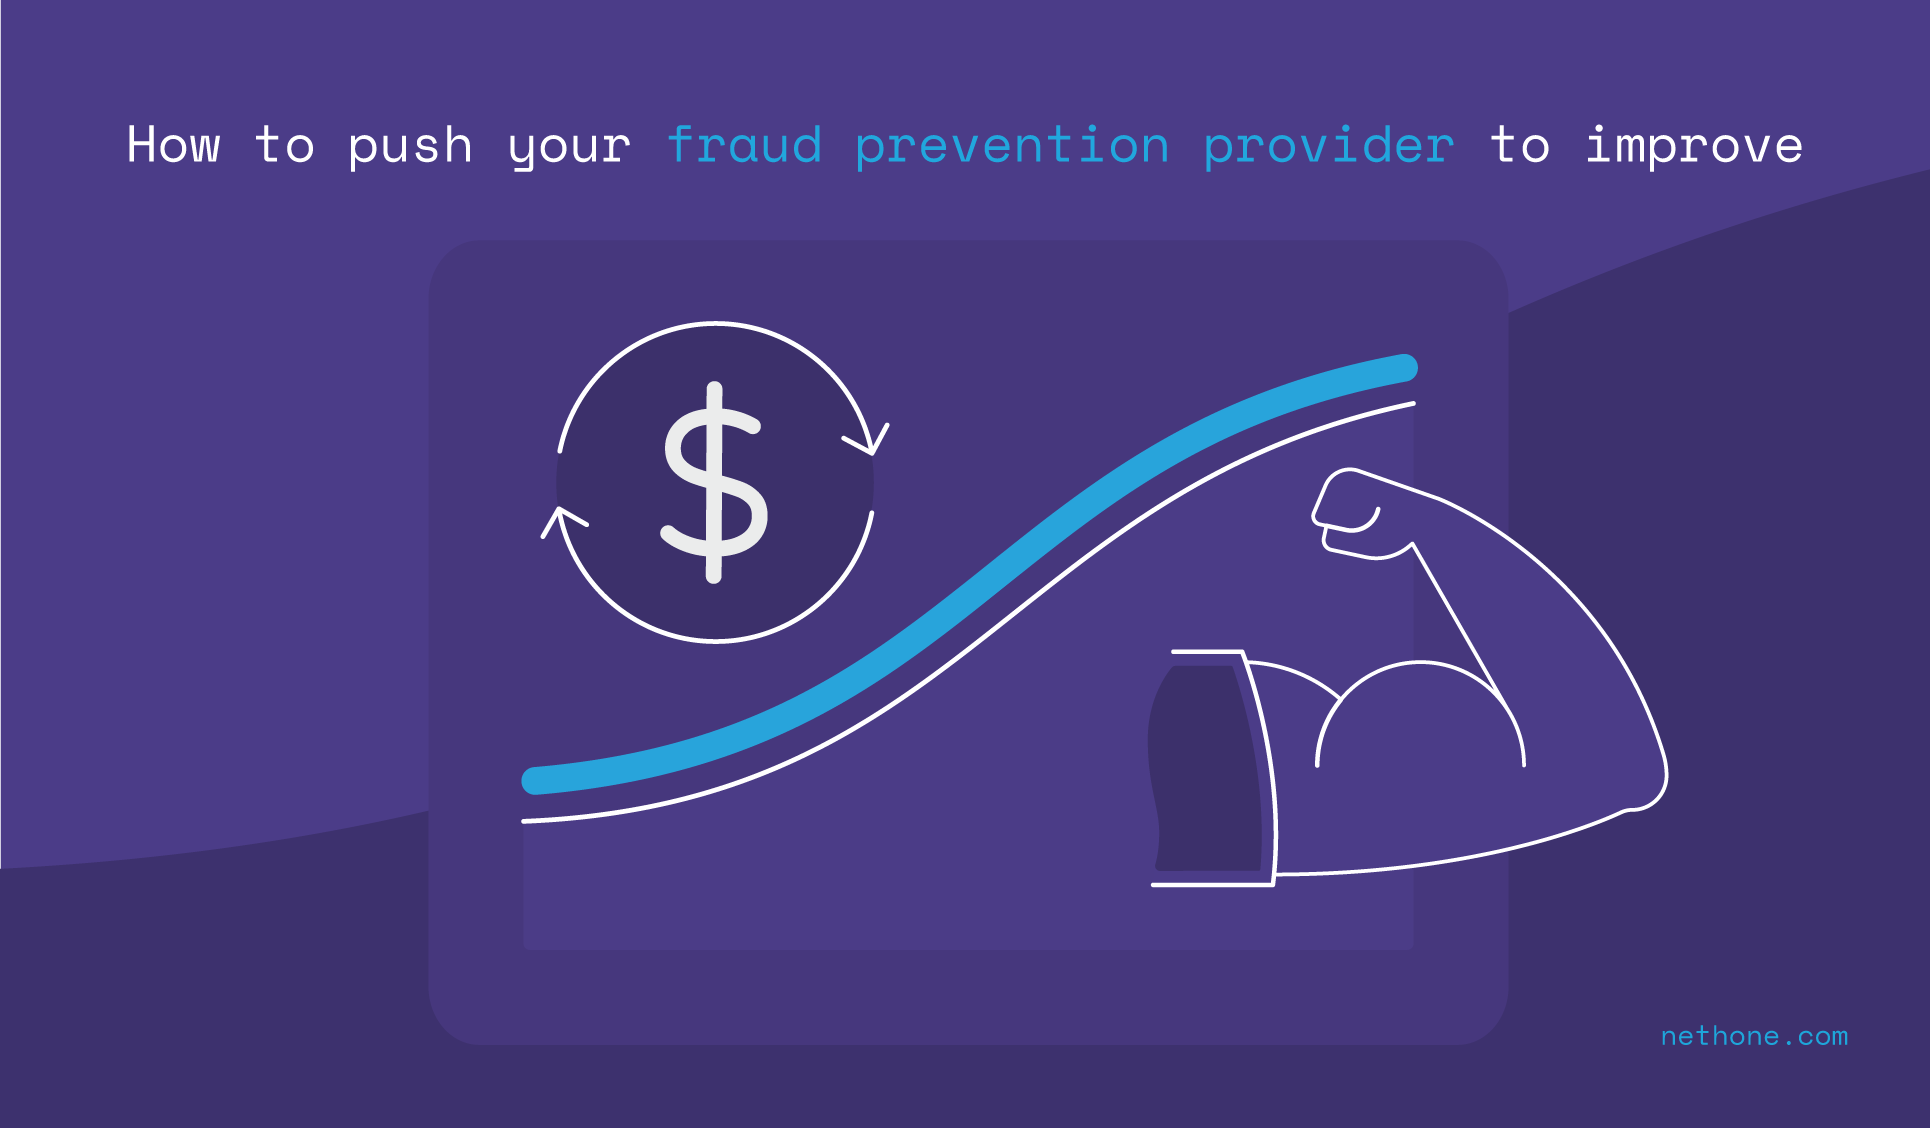 How to push fraud prevention companies to improve